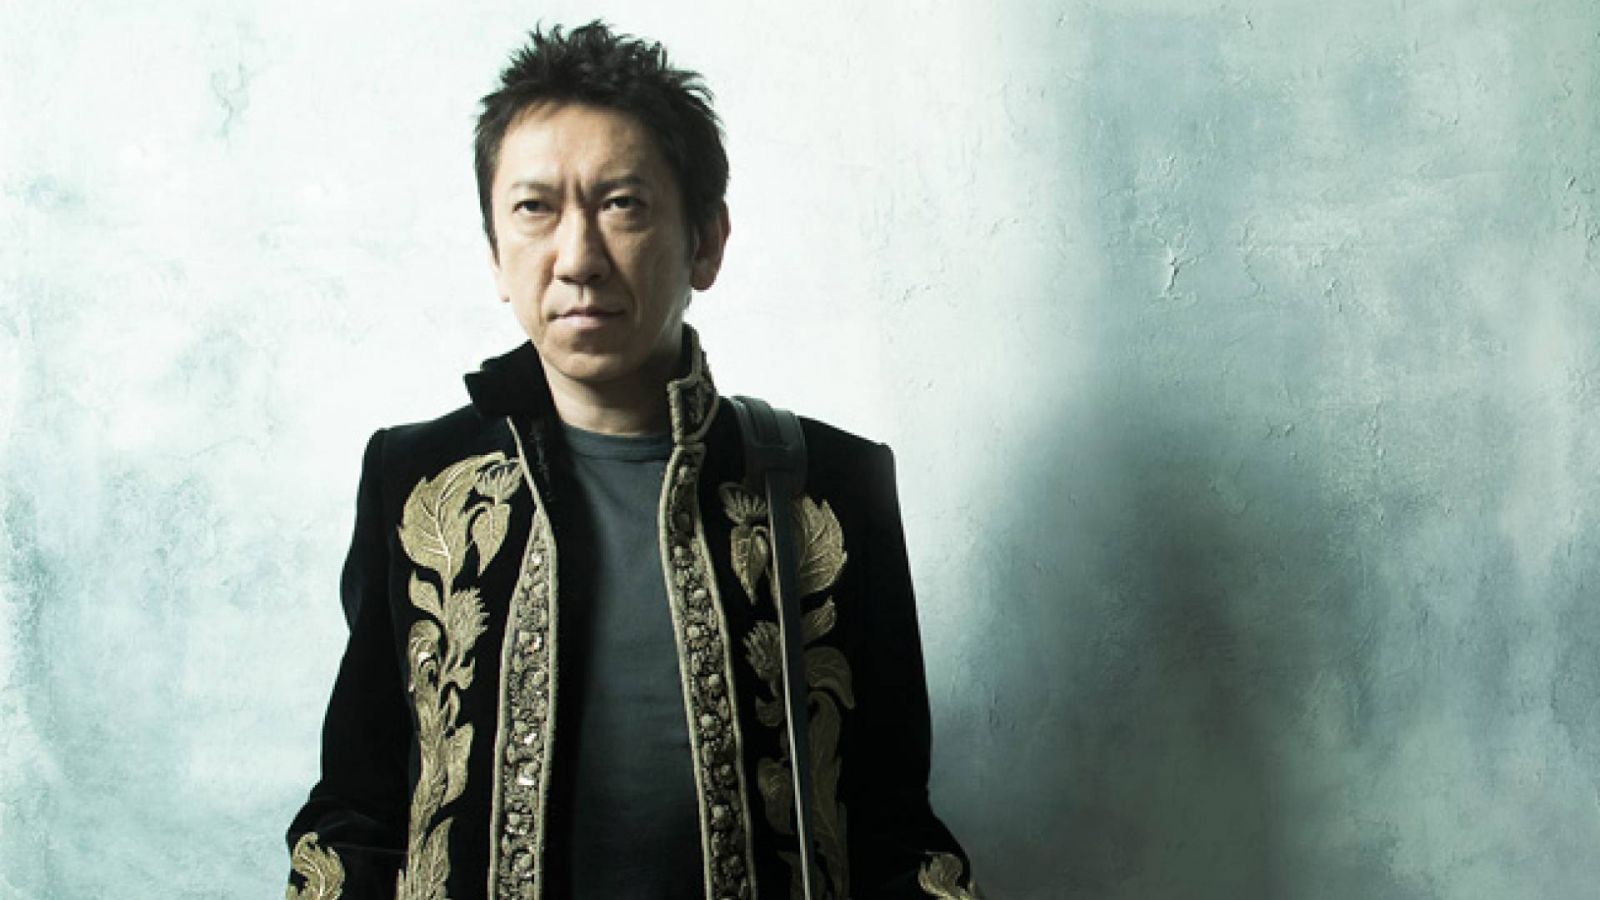 Interview with HOTEI © UNIVERSAL MUSIC LLC. All rights reserved.